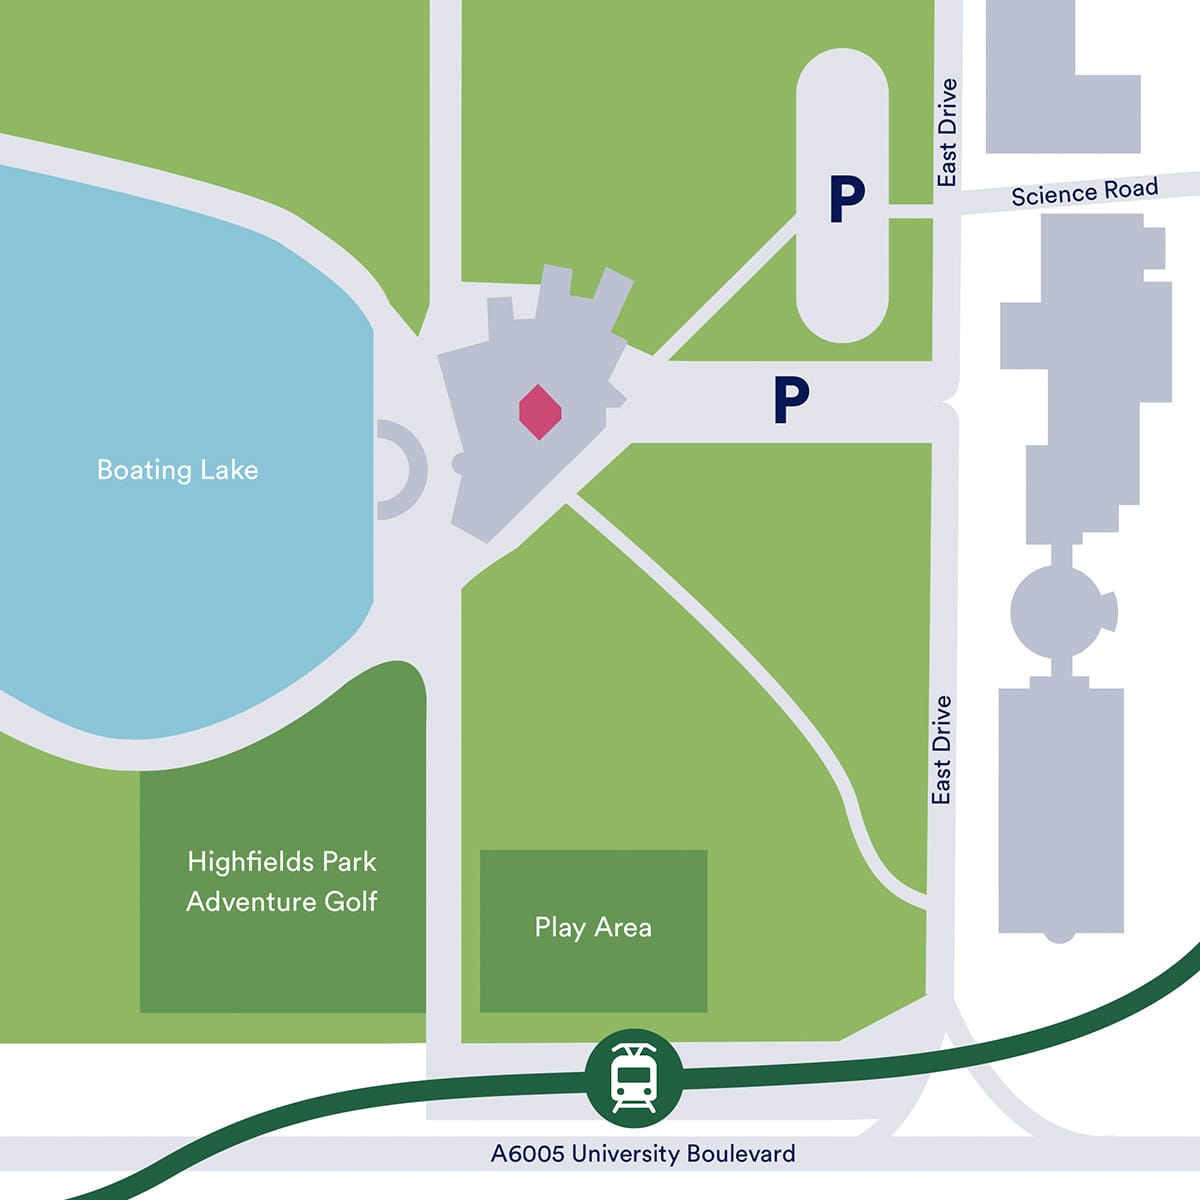 A map showing where the Weston Gallery is located in relation to Lakeside Arts' buildings and the surrounding parkland.